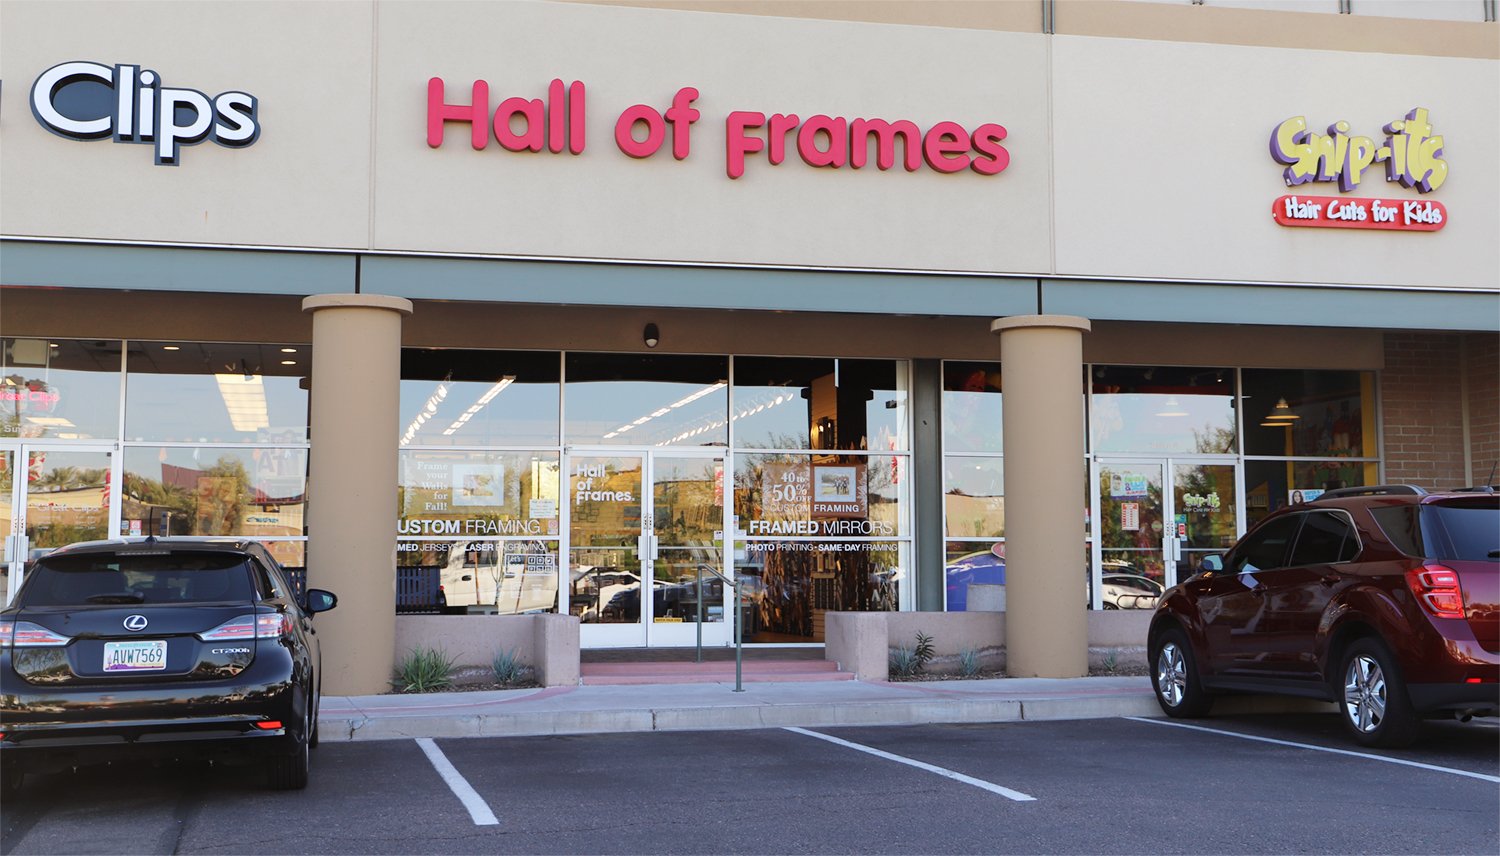 Hall of Frames Chandler Arizona near downtown Chandler and the Chandler Regional Medical Center and Chandler Fashion Center near Costco, Target, and Bed Bath and Beyond.